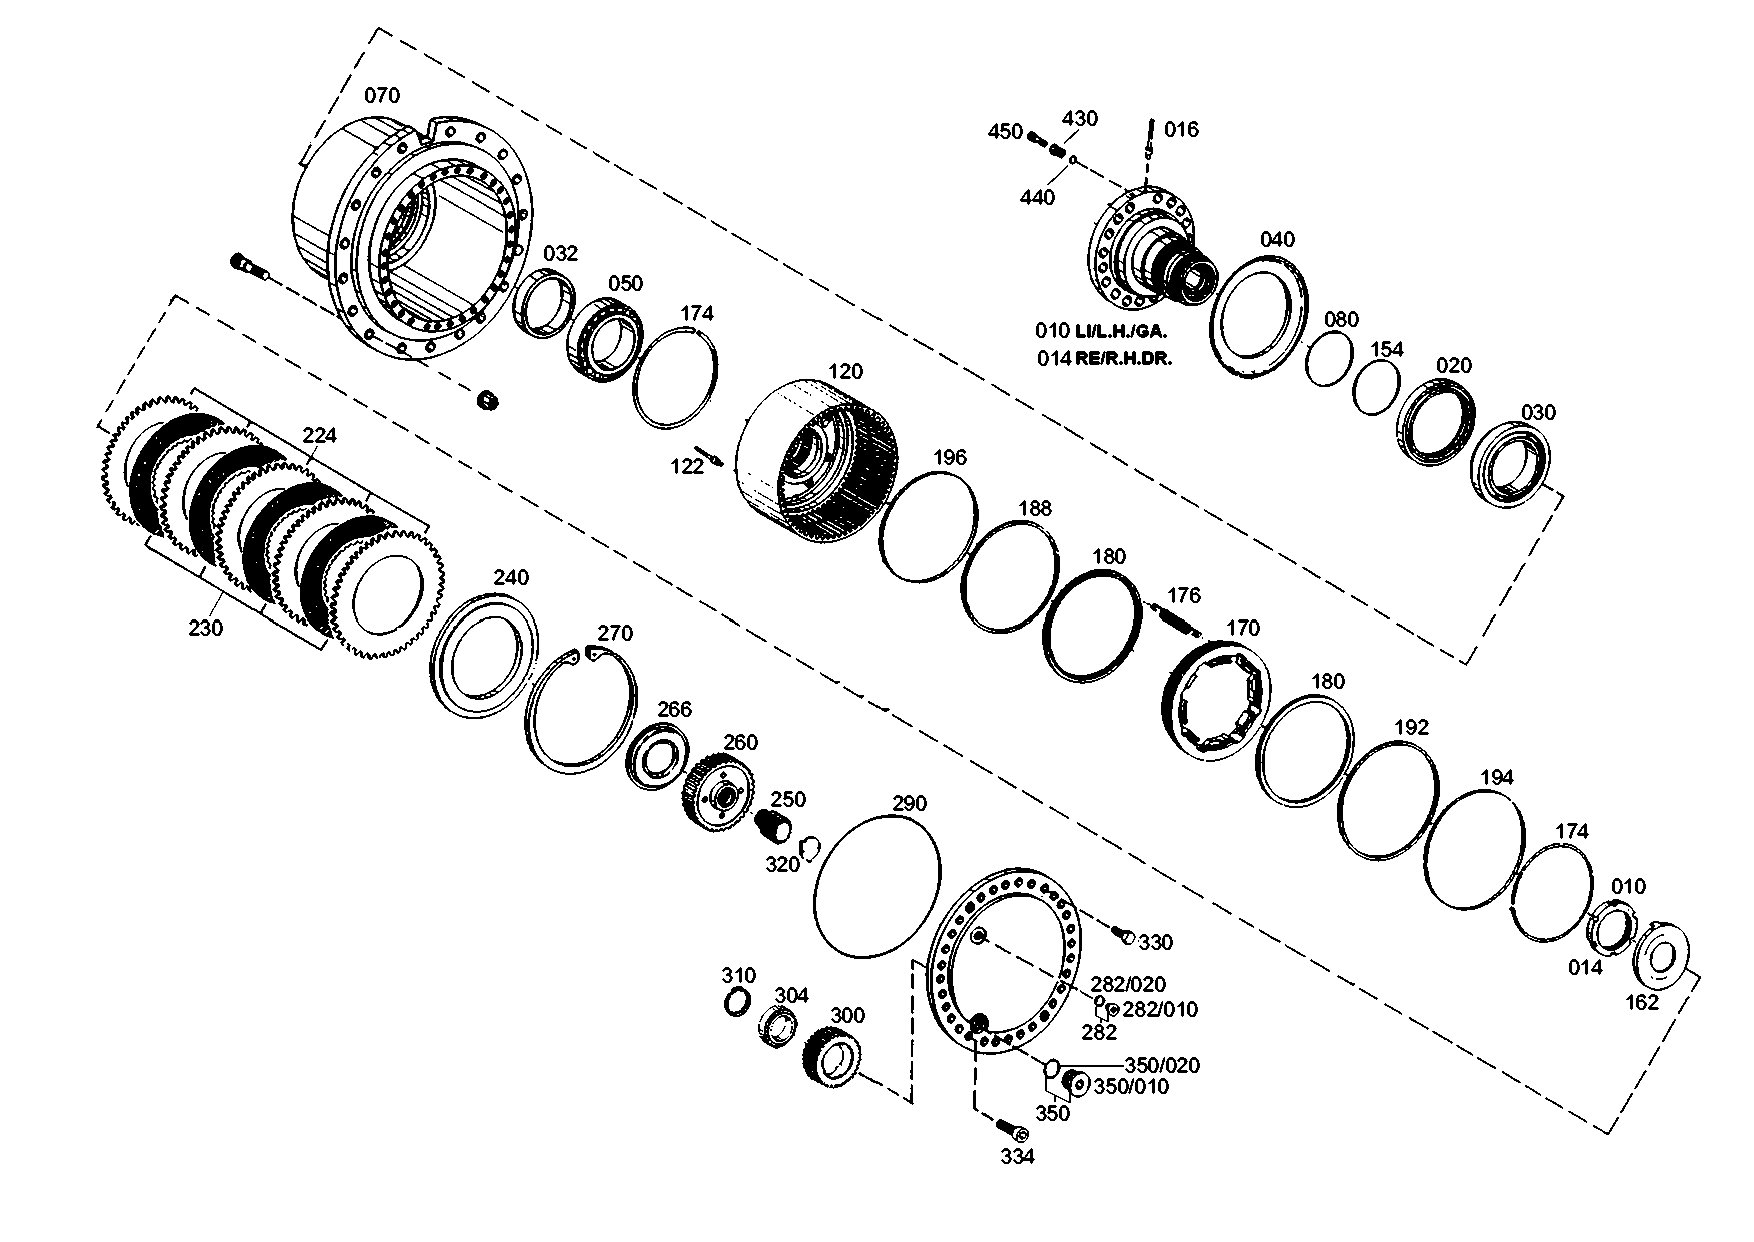 drawing for LIEBHERR GMBH 7623429 - PLANET CARRIER (figure 5)